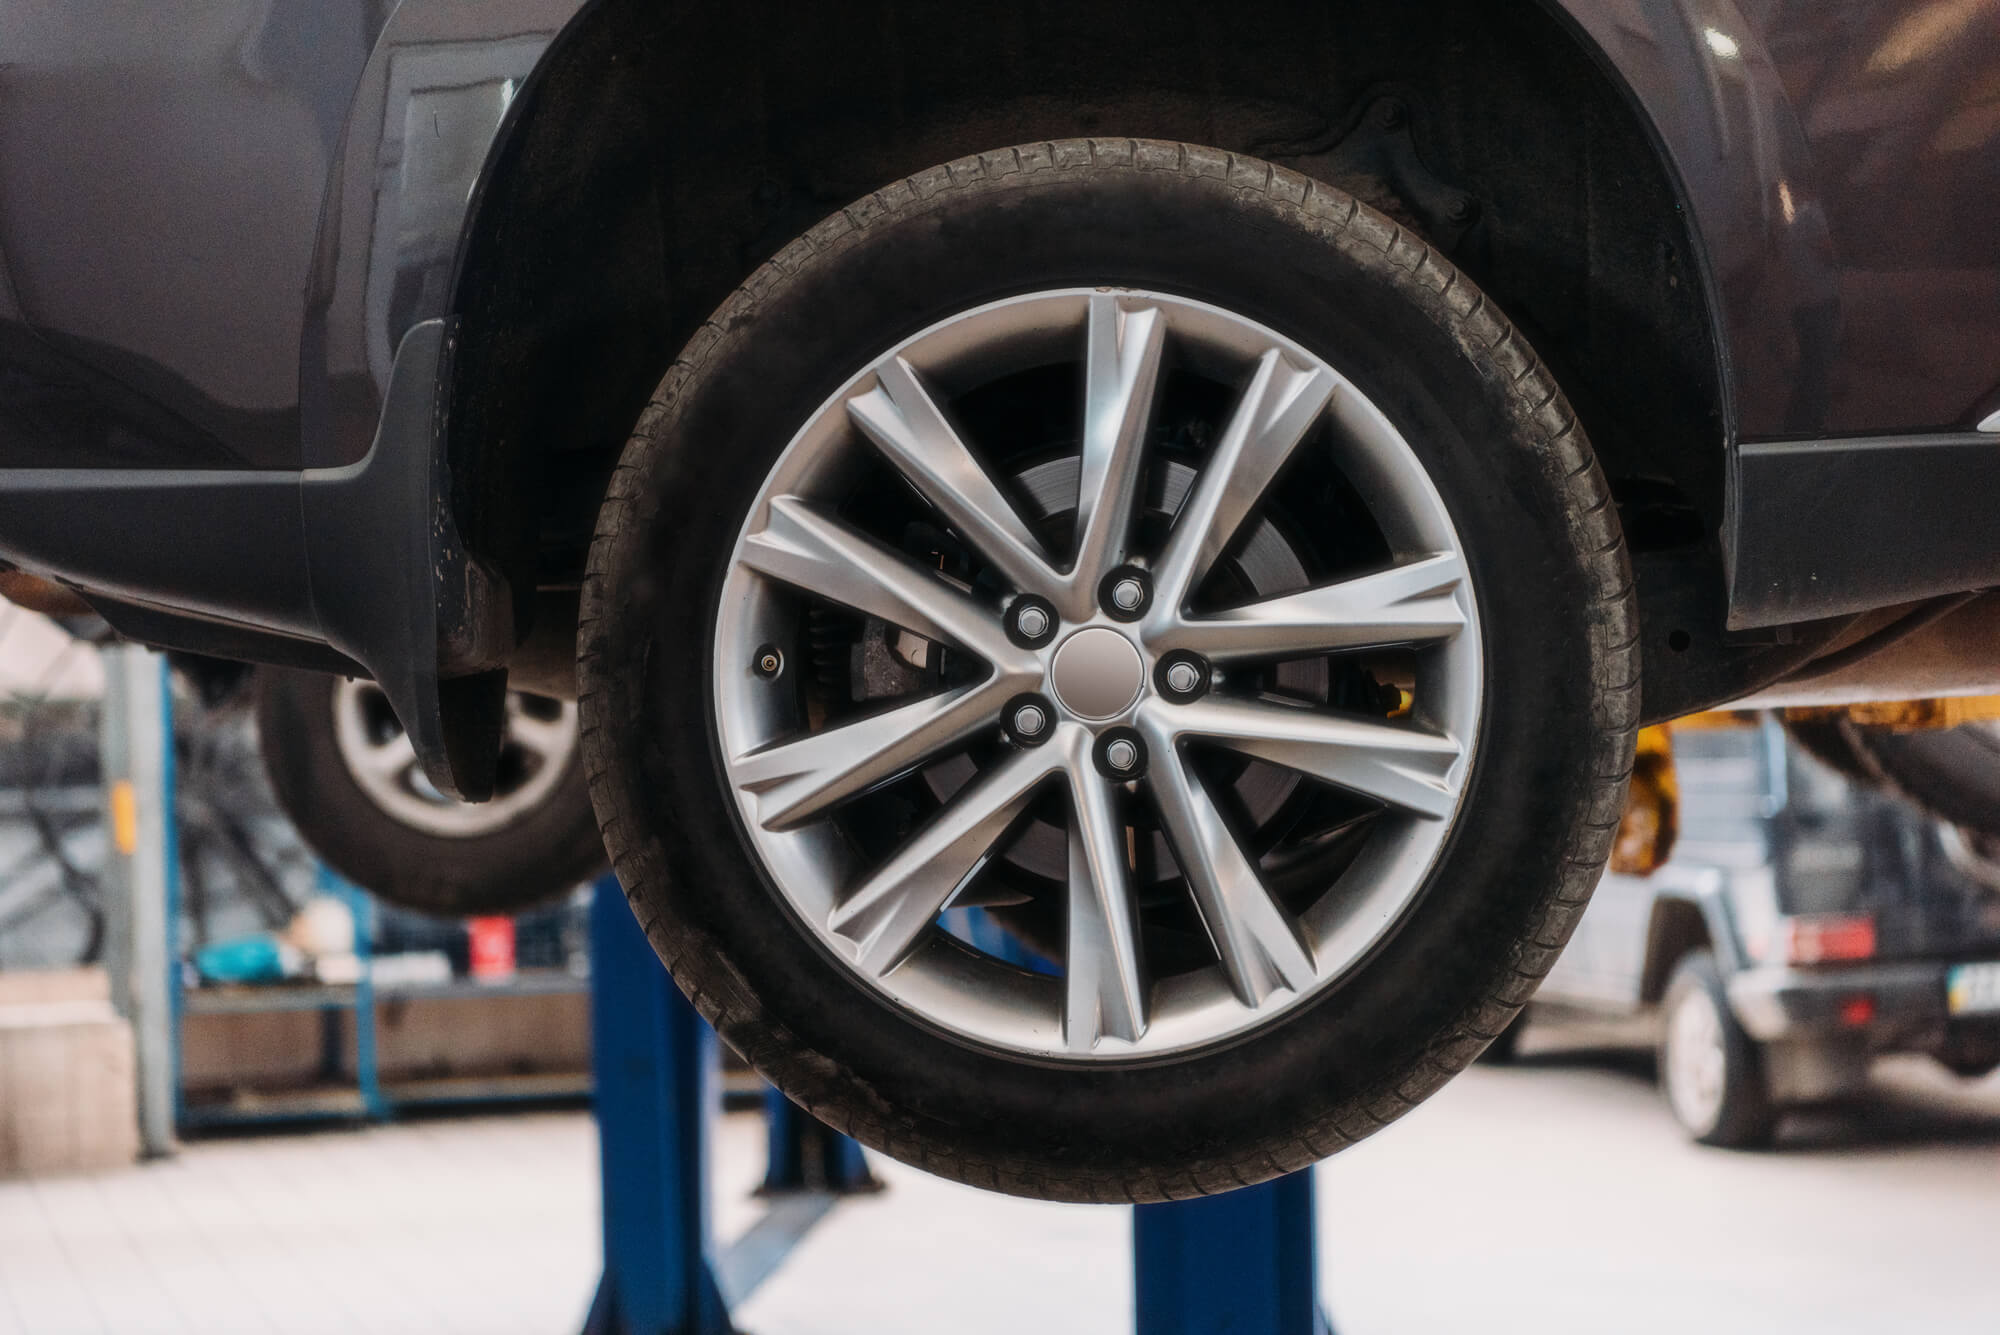 How To Deal With Every Type of Wheel Repair | The Drive